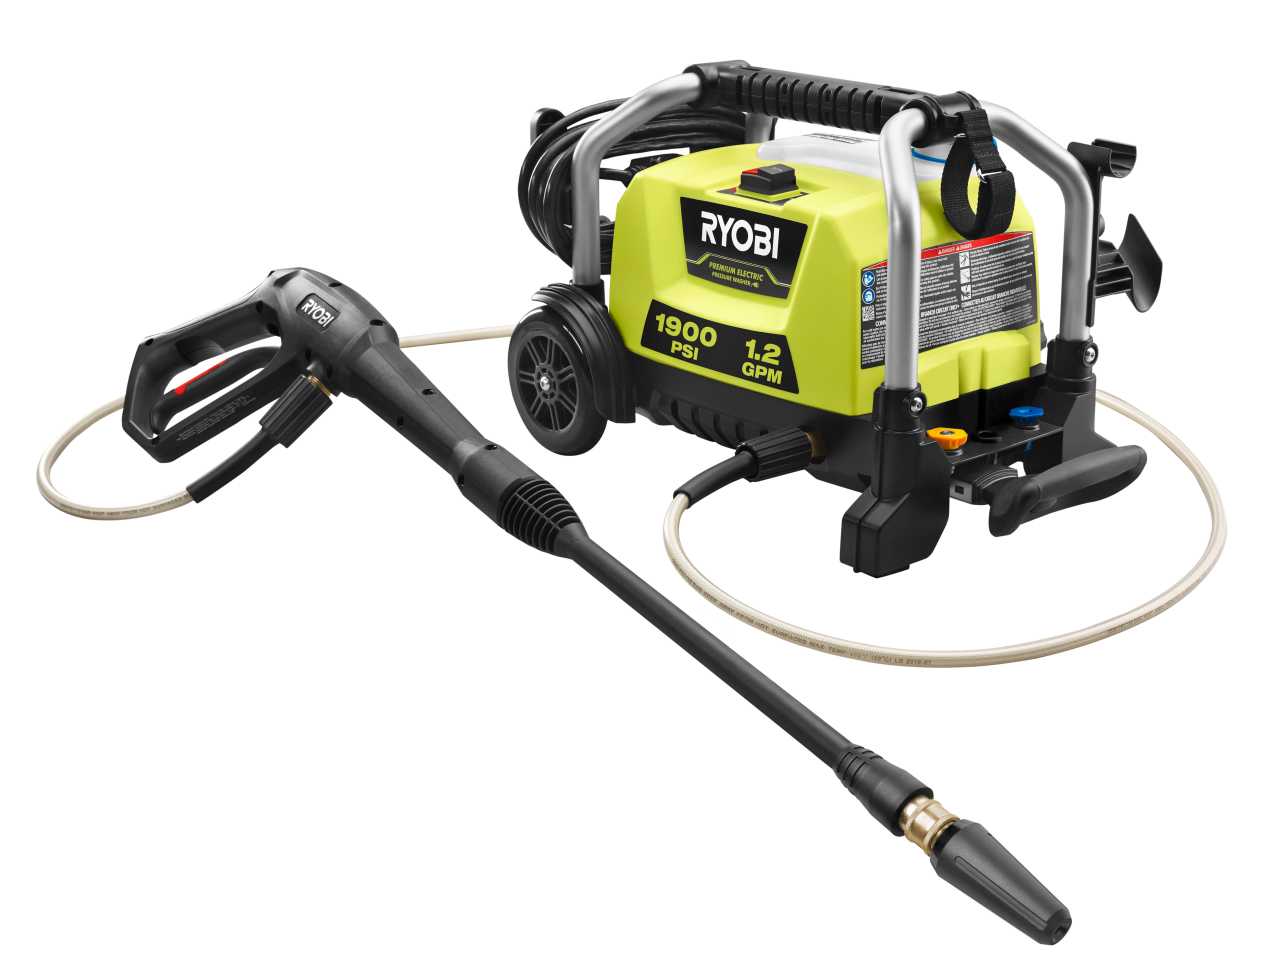 Product Features Image for 1900 PSI 1.2 GPM Cold Water Wheeled Electric Pressure Washer.